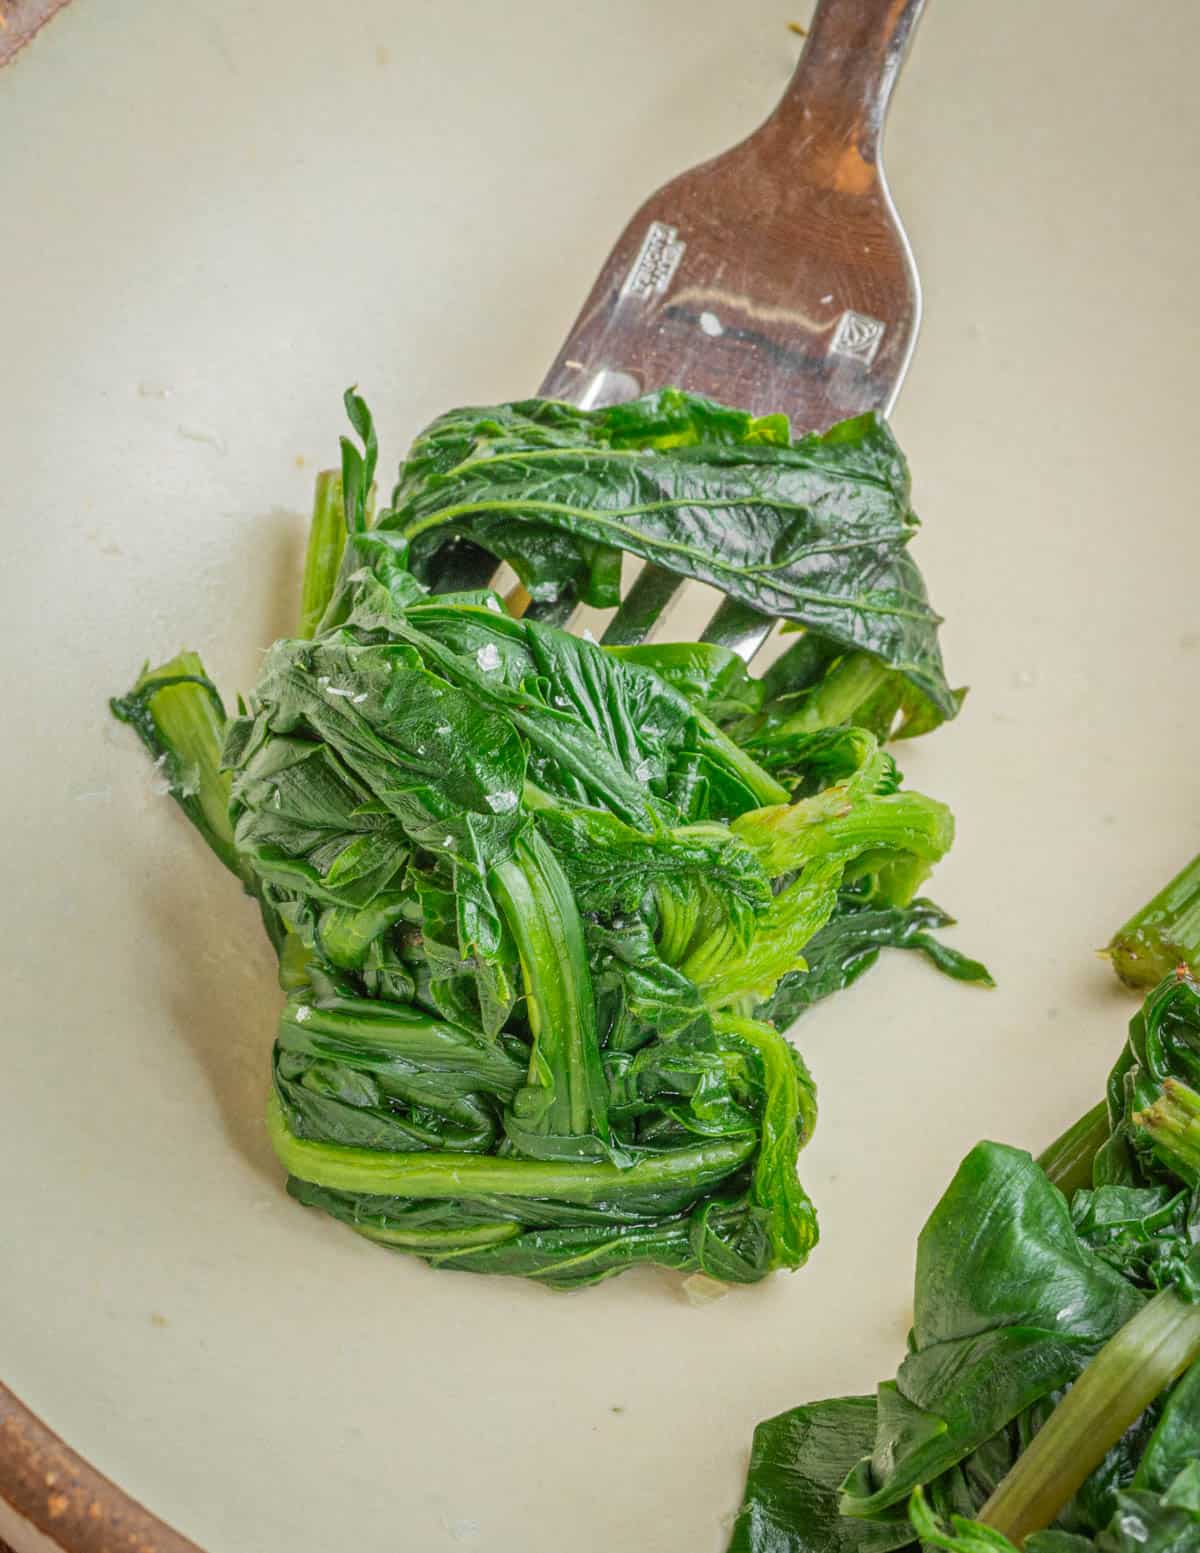 Twirling cooked horta greens around a fork to eat. 